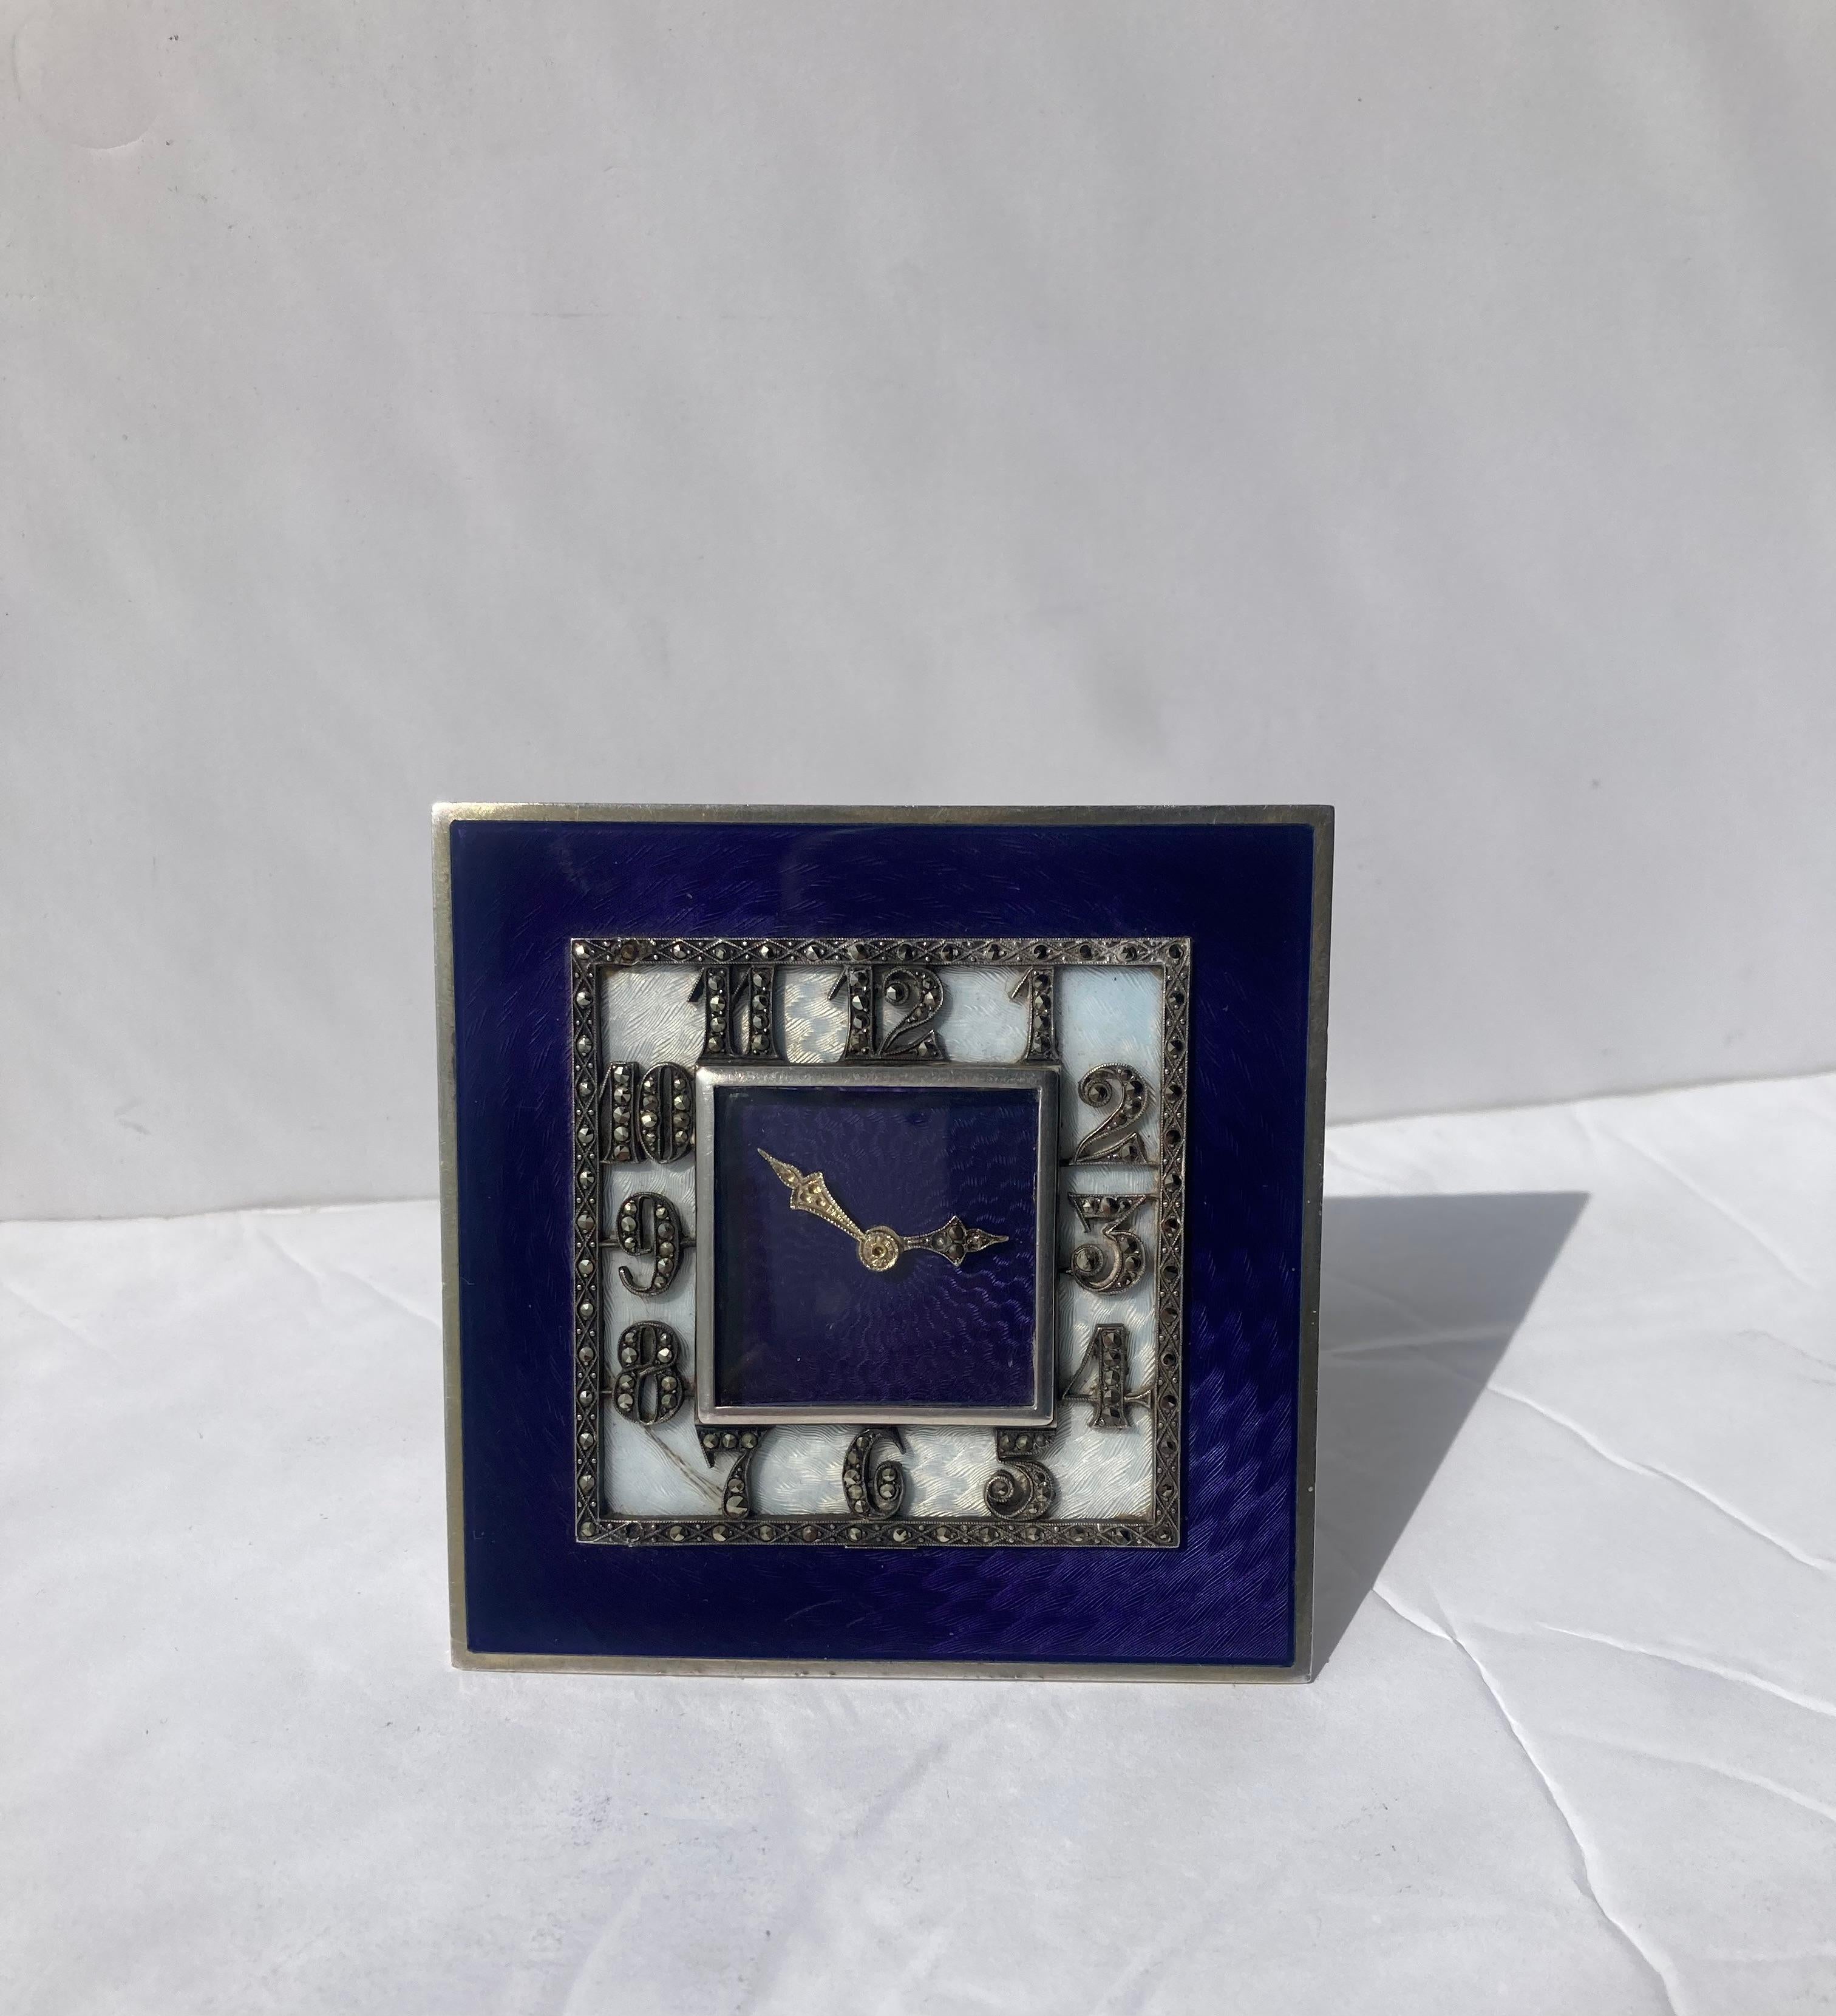 Art Deco Sterling Silver, Enamel, Marcasites Desk/Table Clock, DRGM In Good Condition For Sale In Los Angeles, CA